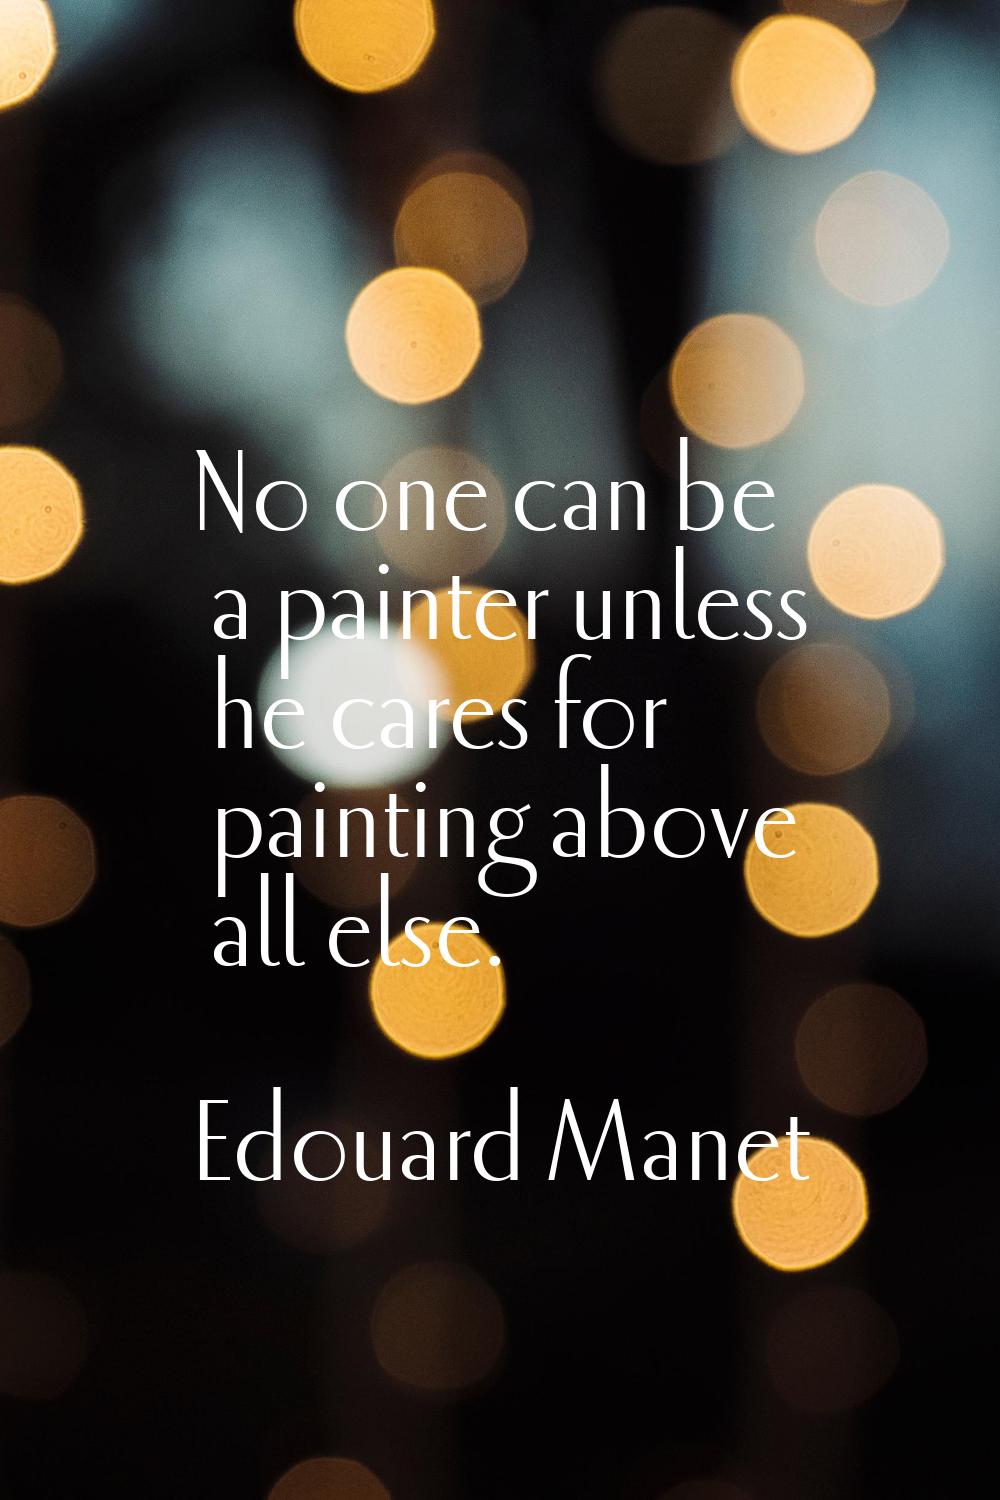 No one can be a painter unless he cares for painting above all else.